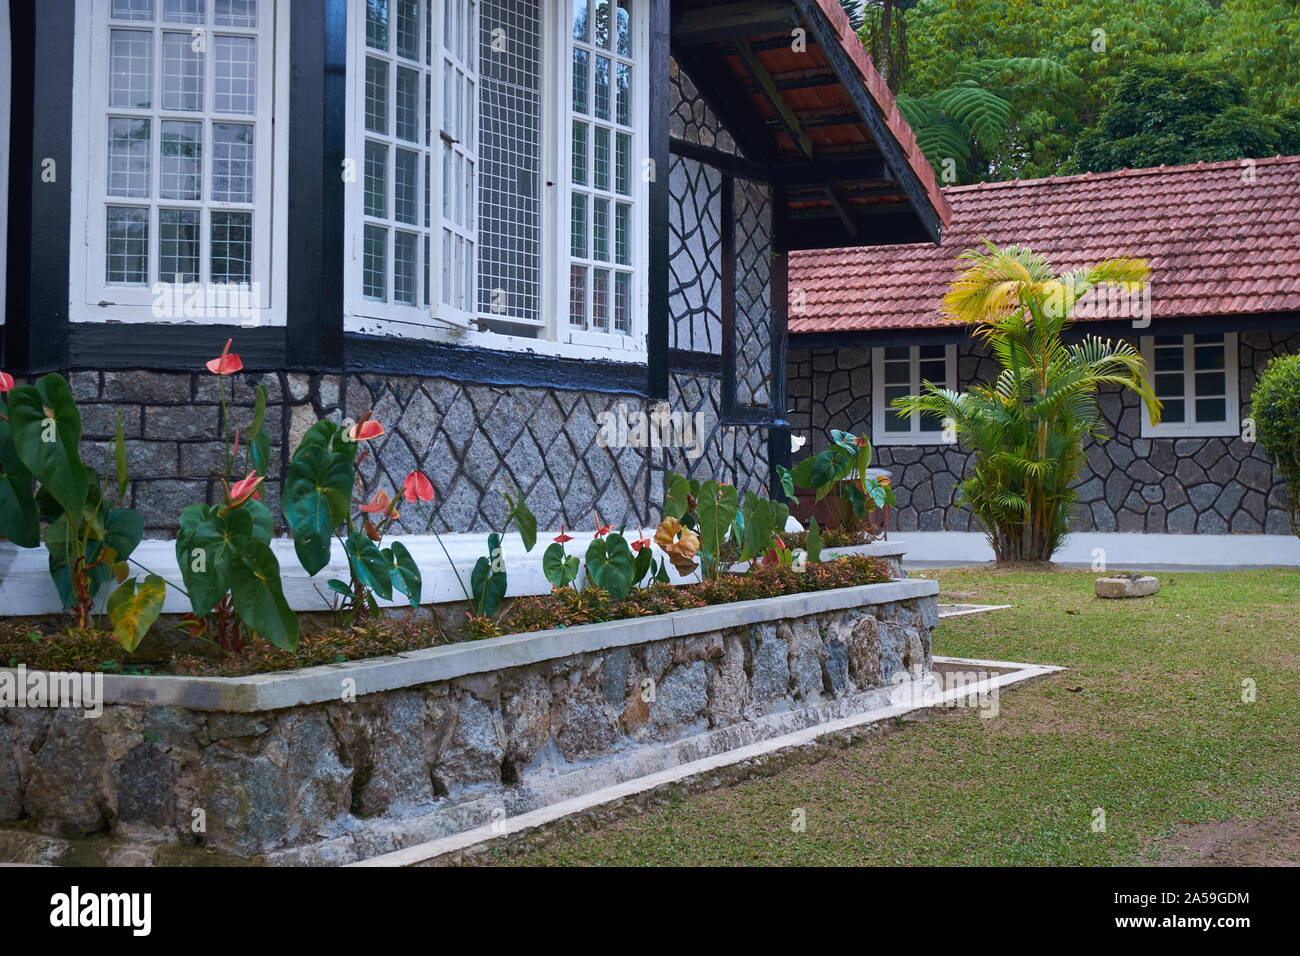 A Look At An Old Original Stone Wall Cottage Bungalow In Fraser S Hill Malaysia Stock Photo Alamy